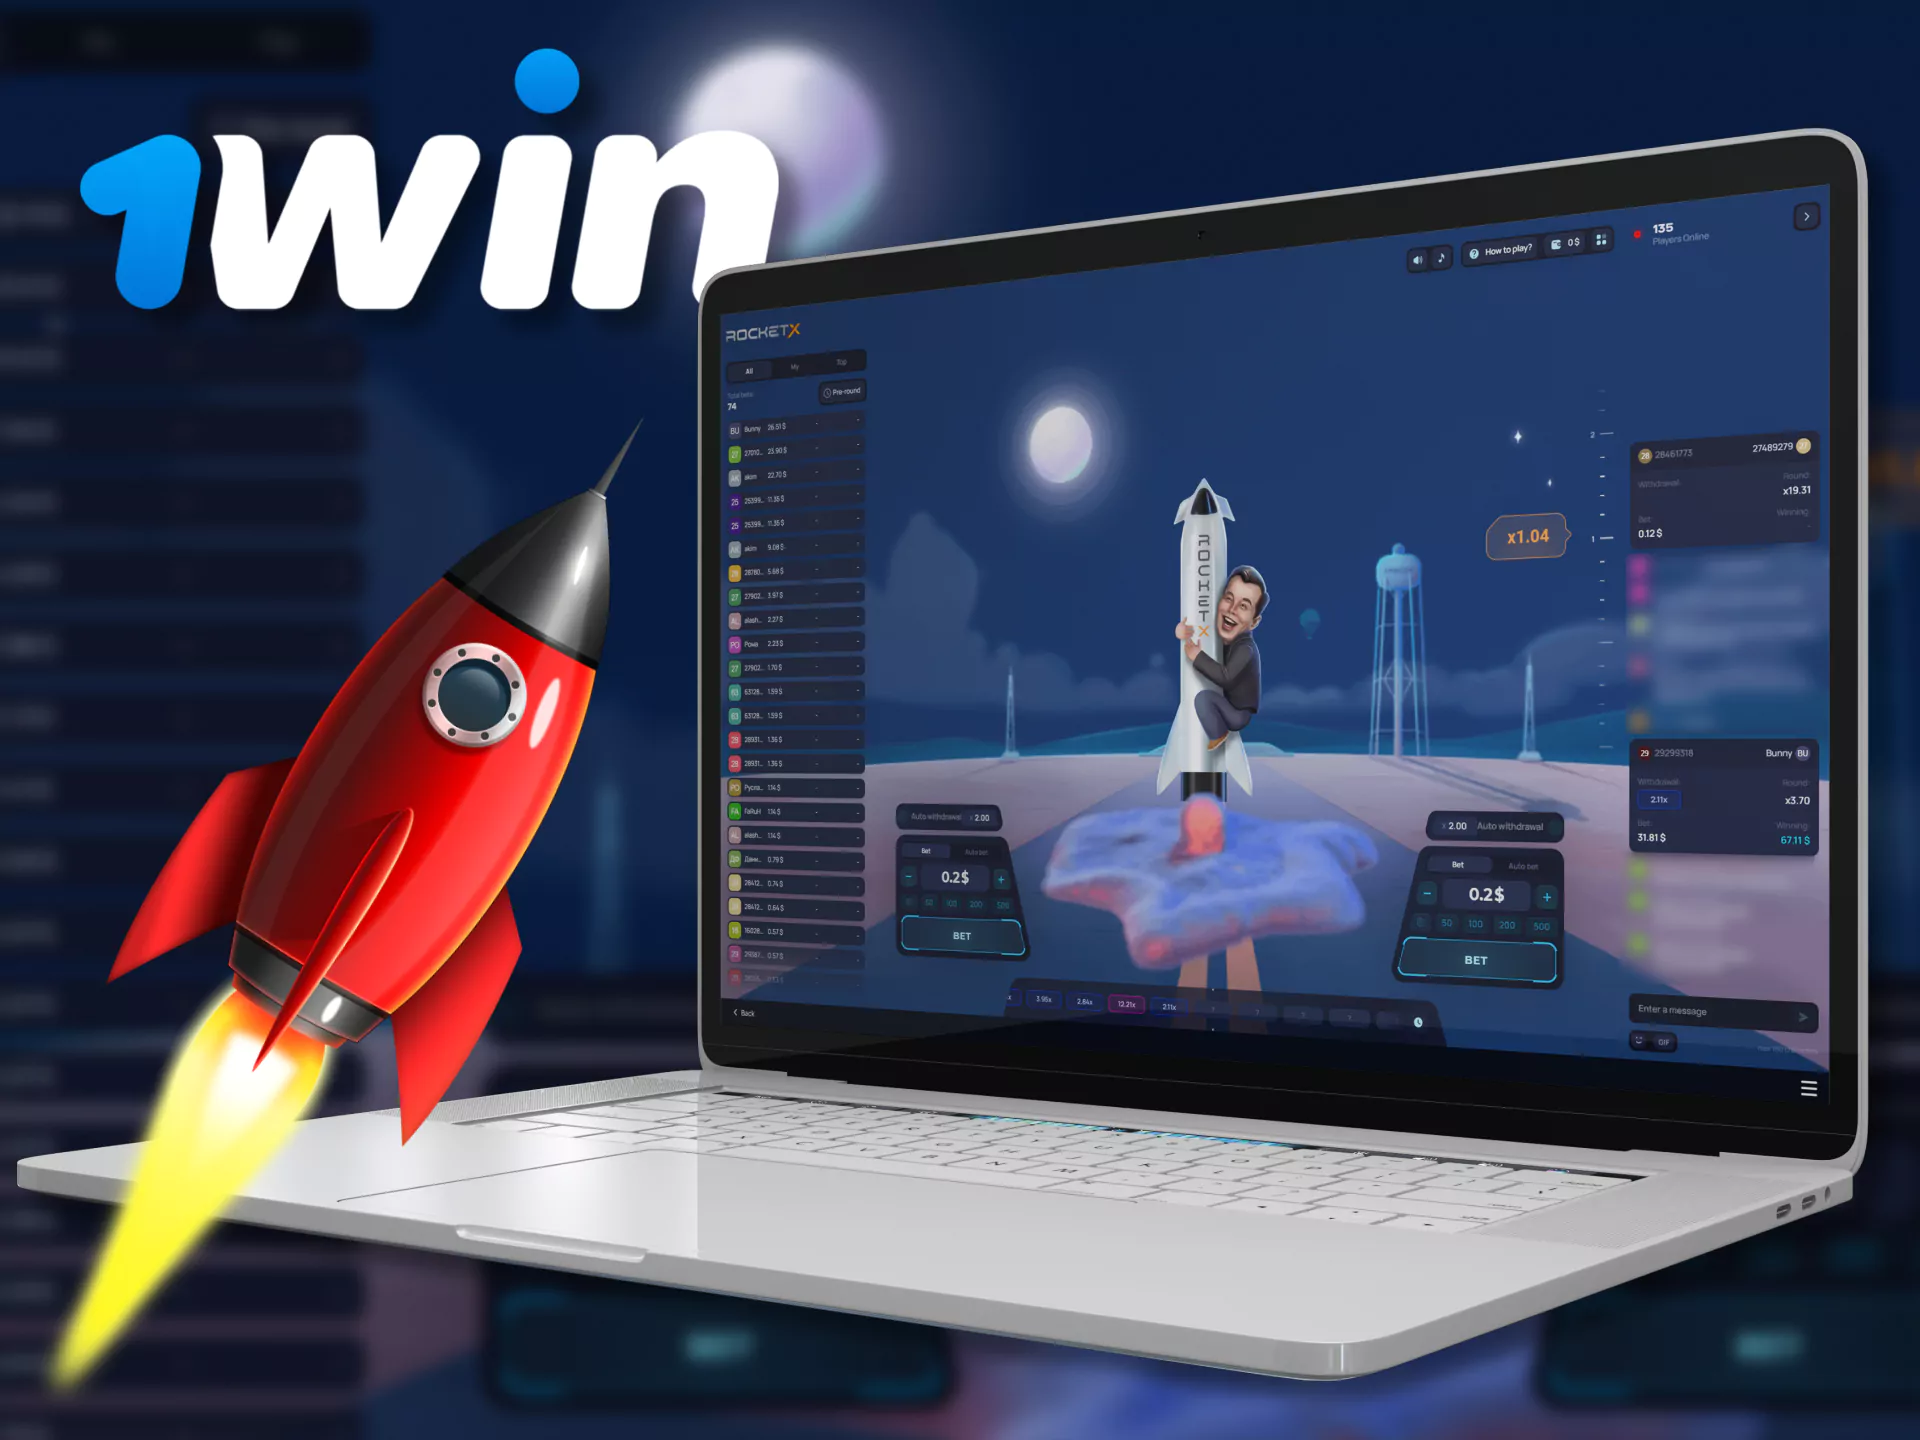 Play the exciting Rocket X at 1win.